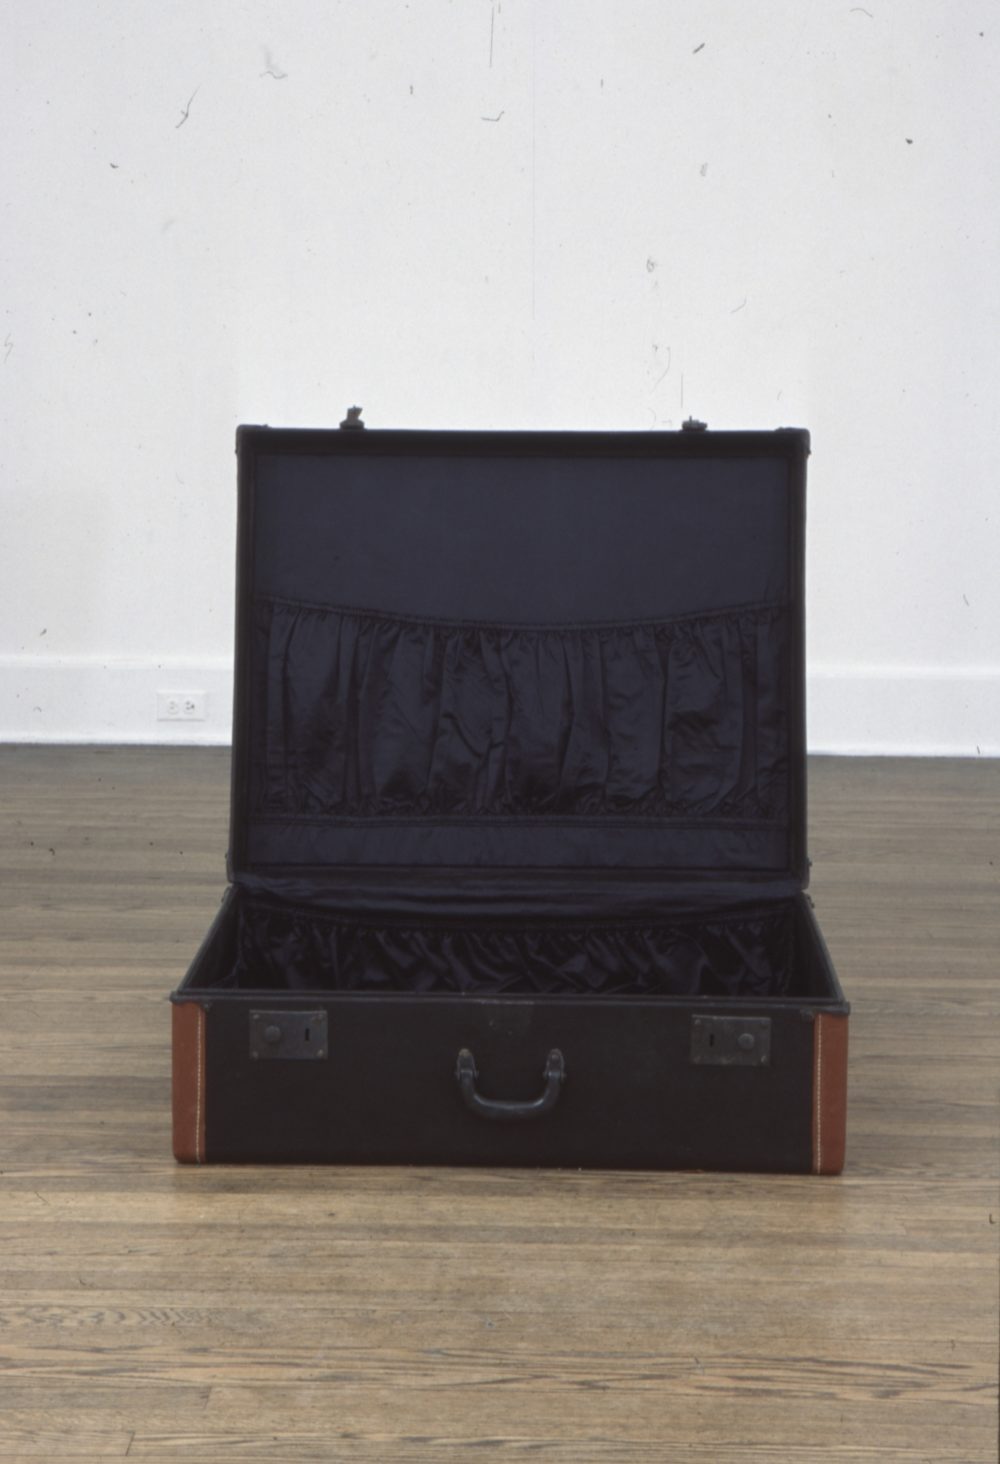 An empty suitcase on the floor